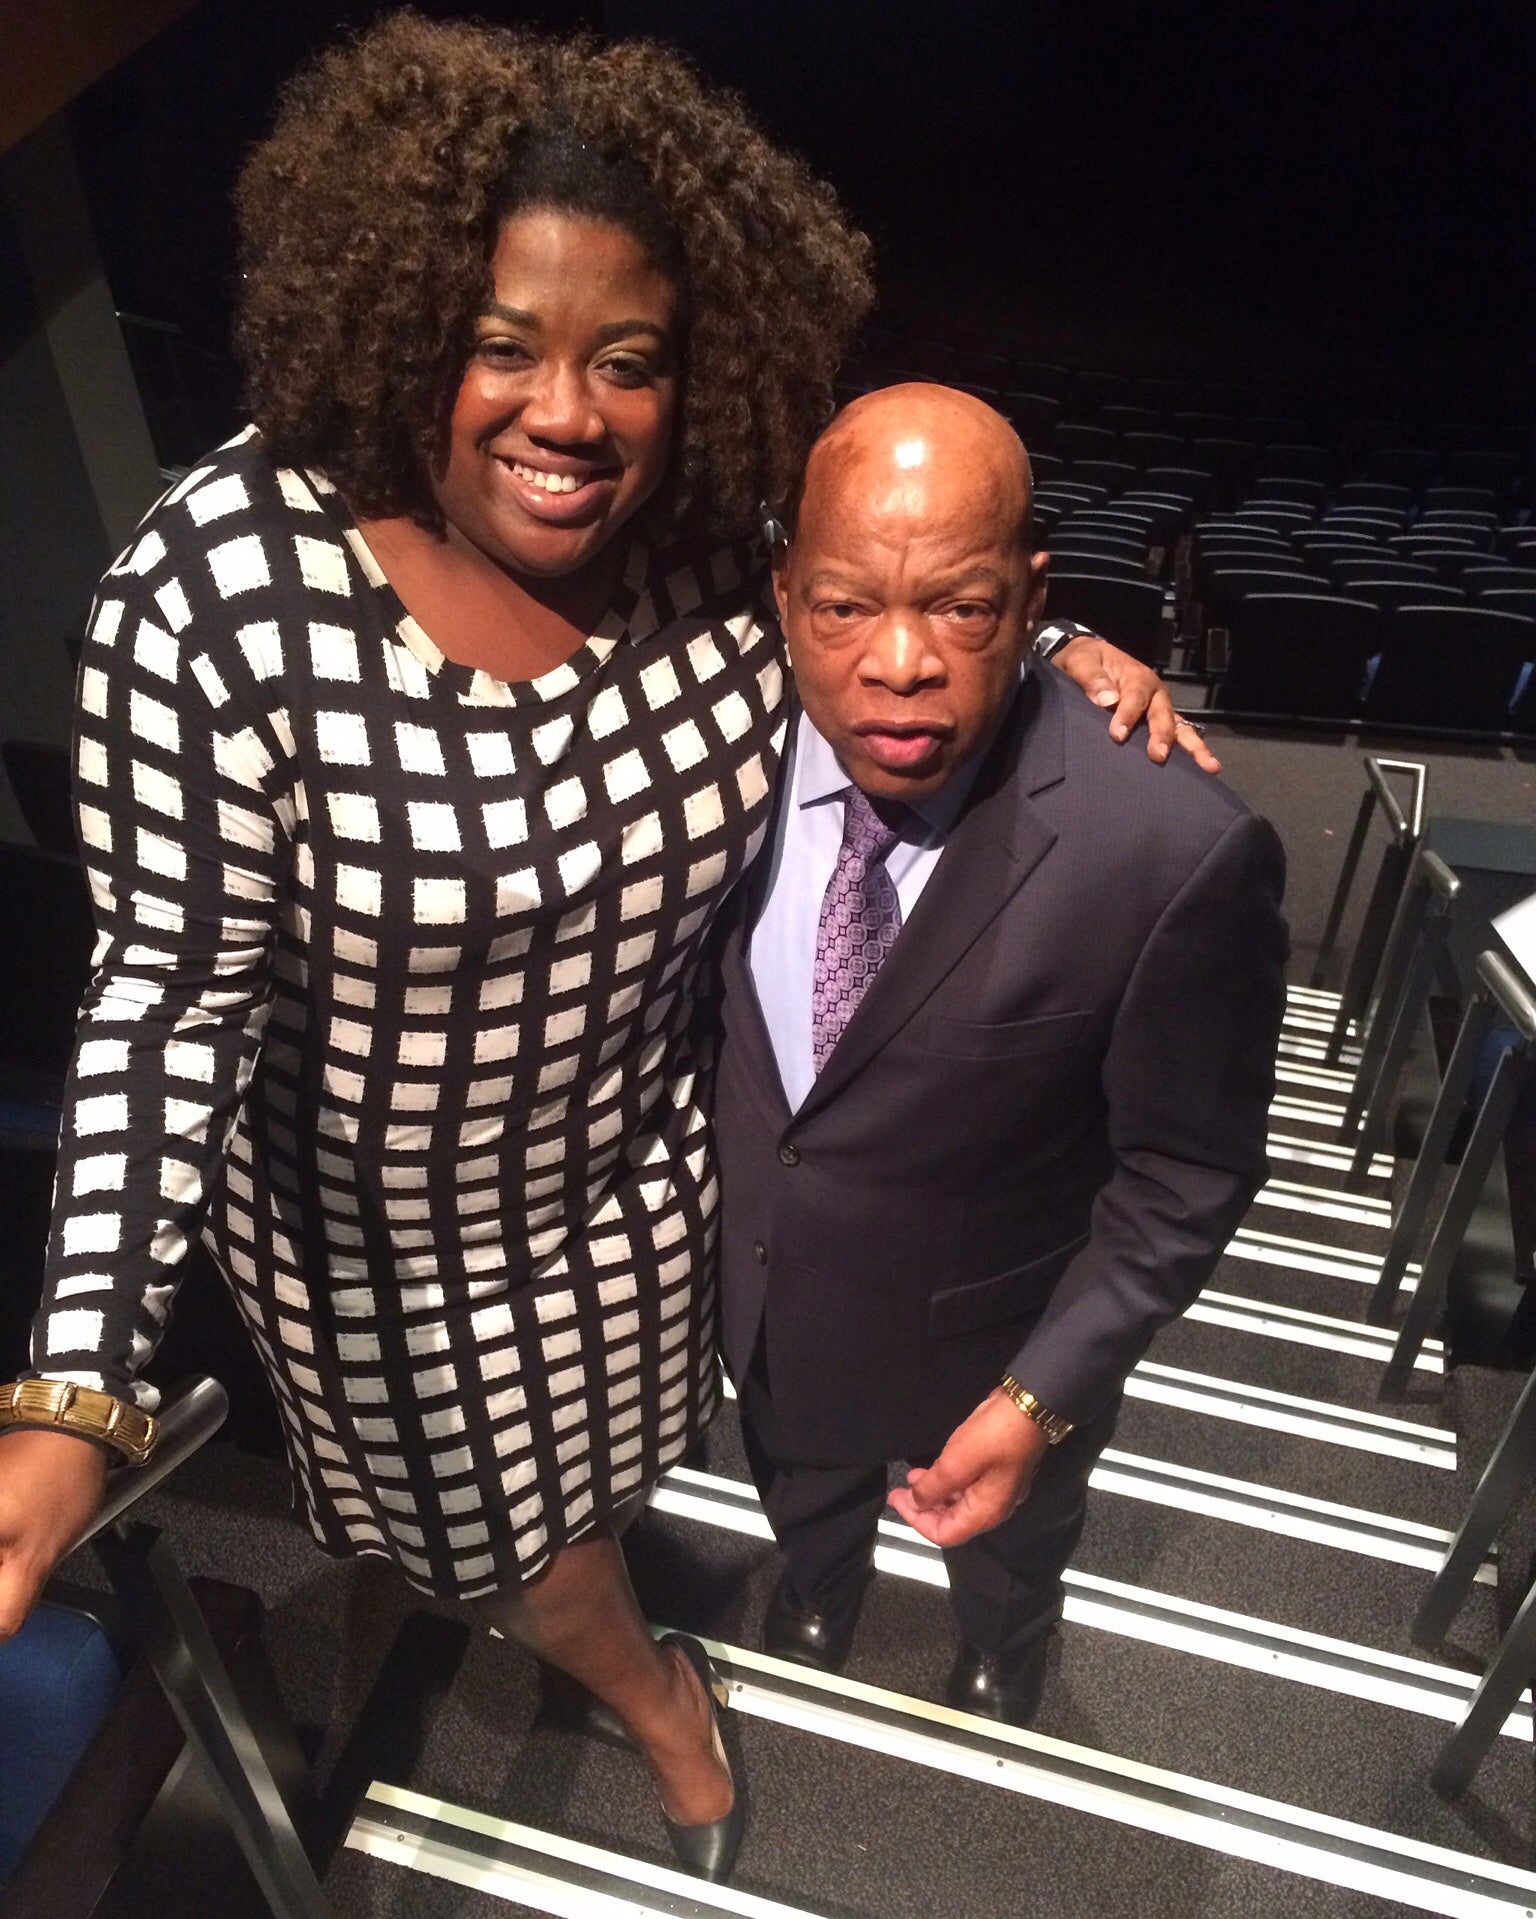 My Righteous Guide: Congressman John Lewis And His Commitment To ‘Good Trouble’